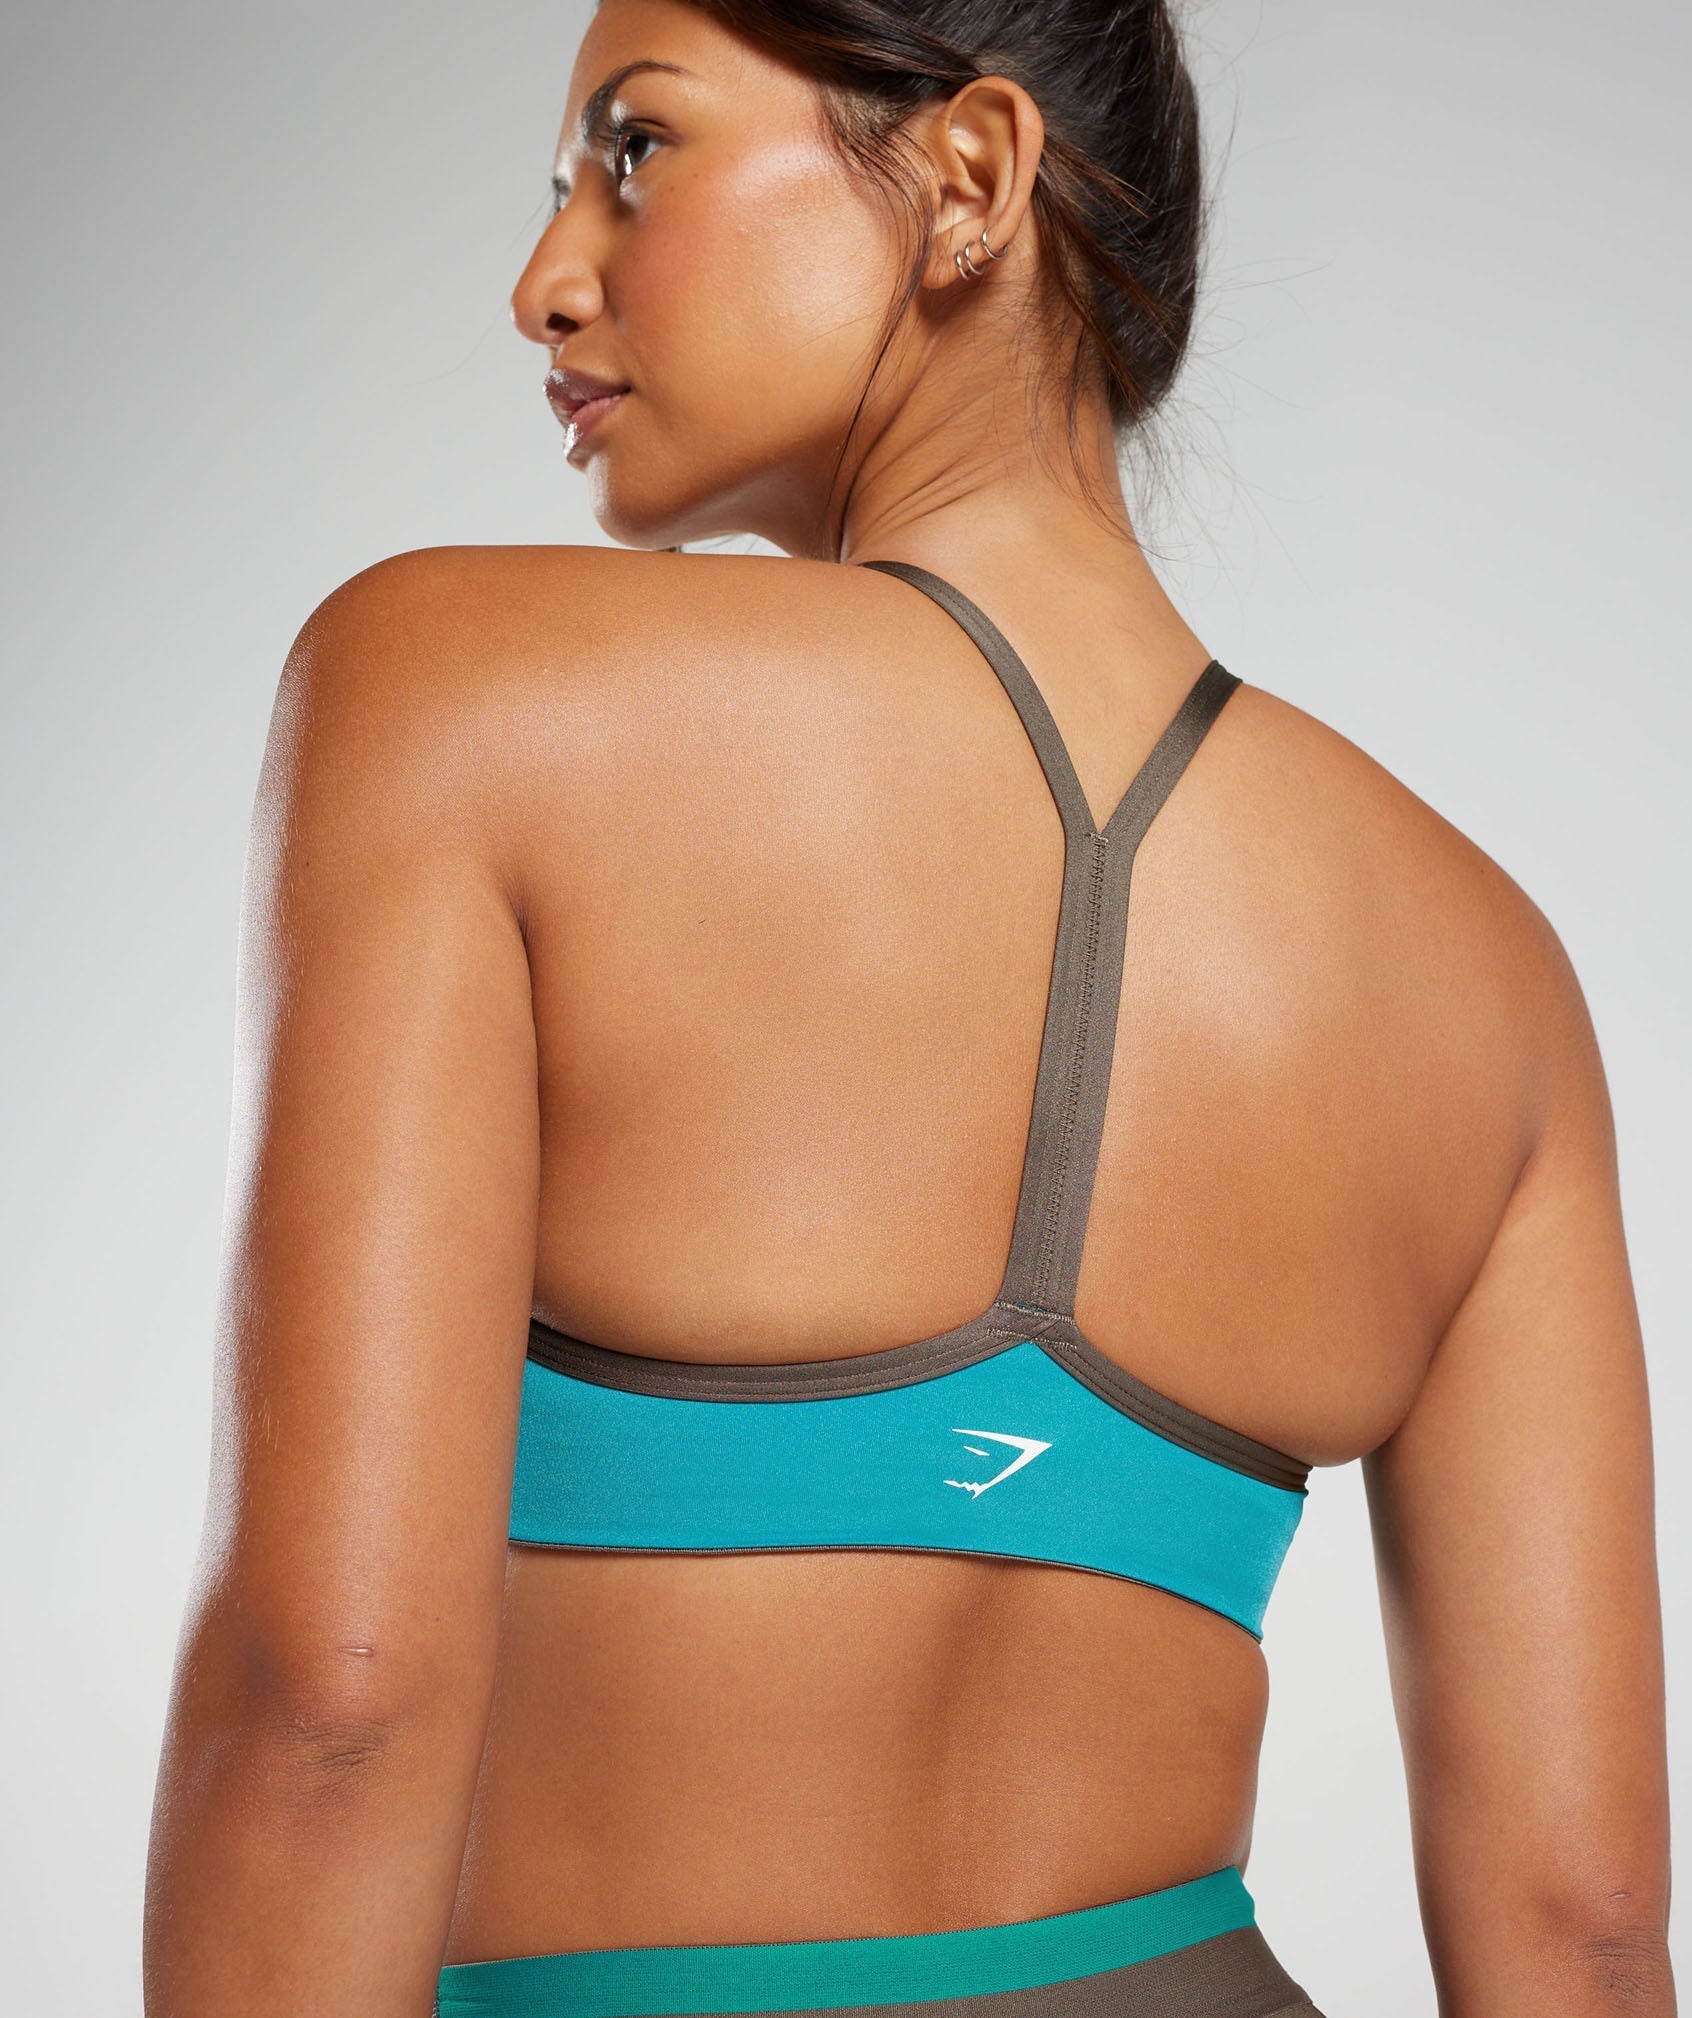 New sports bra being released by Gymshark. Seriously no one with anything  above a B cup could wear this bra as a sports bra… (I wouldn't even wear  this and i'm a high B cup) I dont see it covering much even if you size up  : r/gymsnark